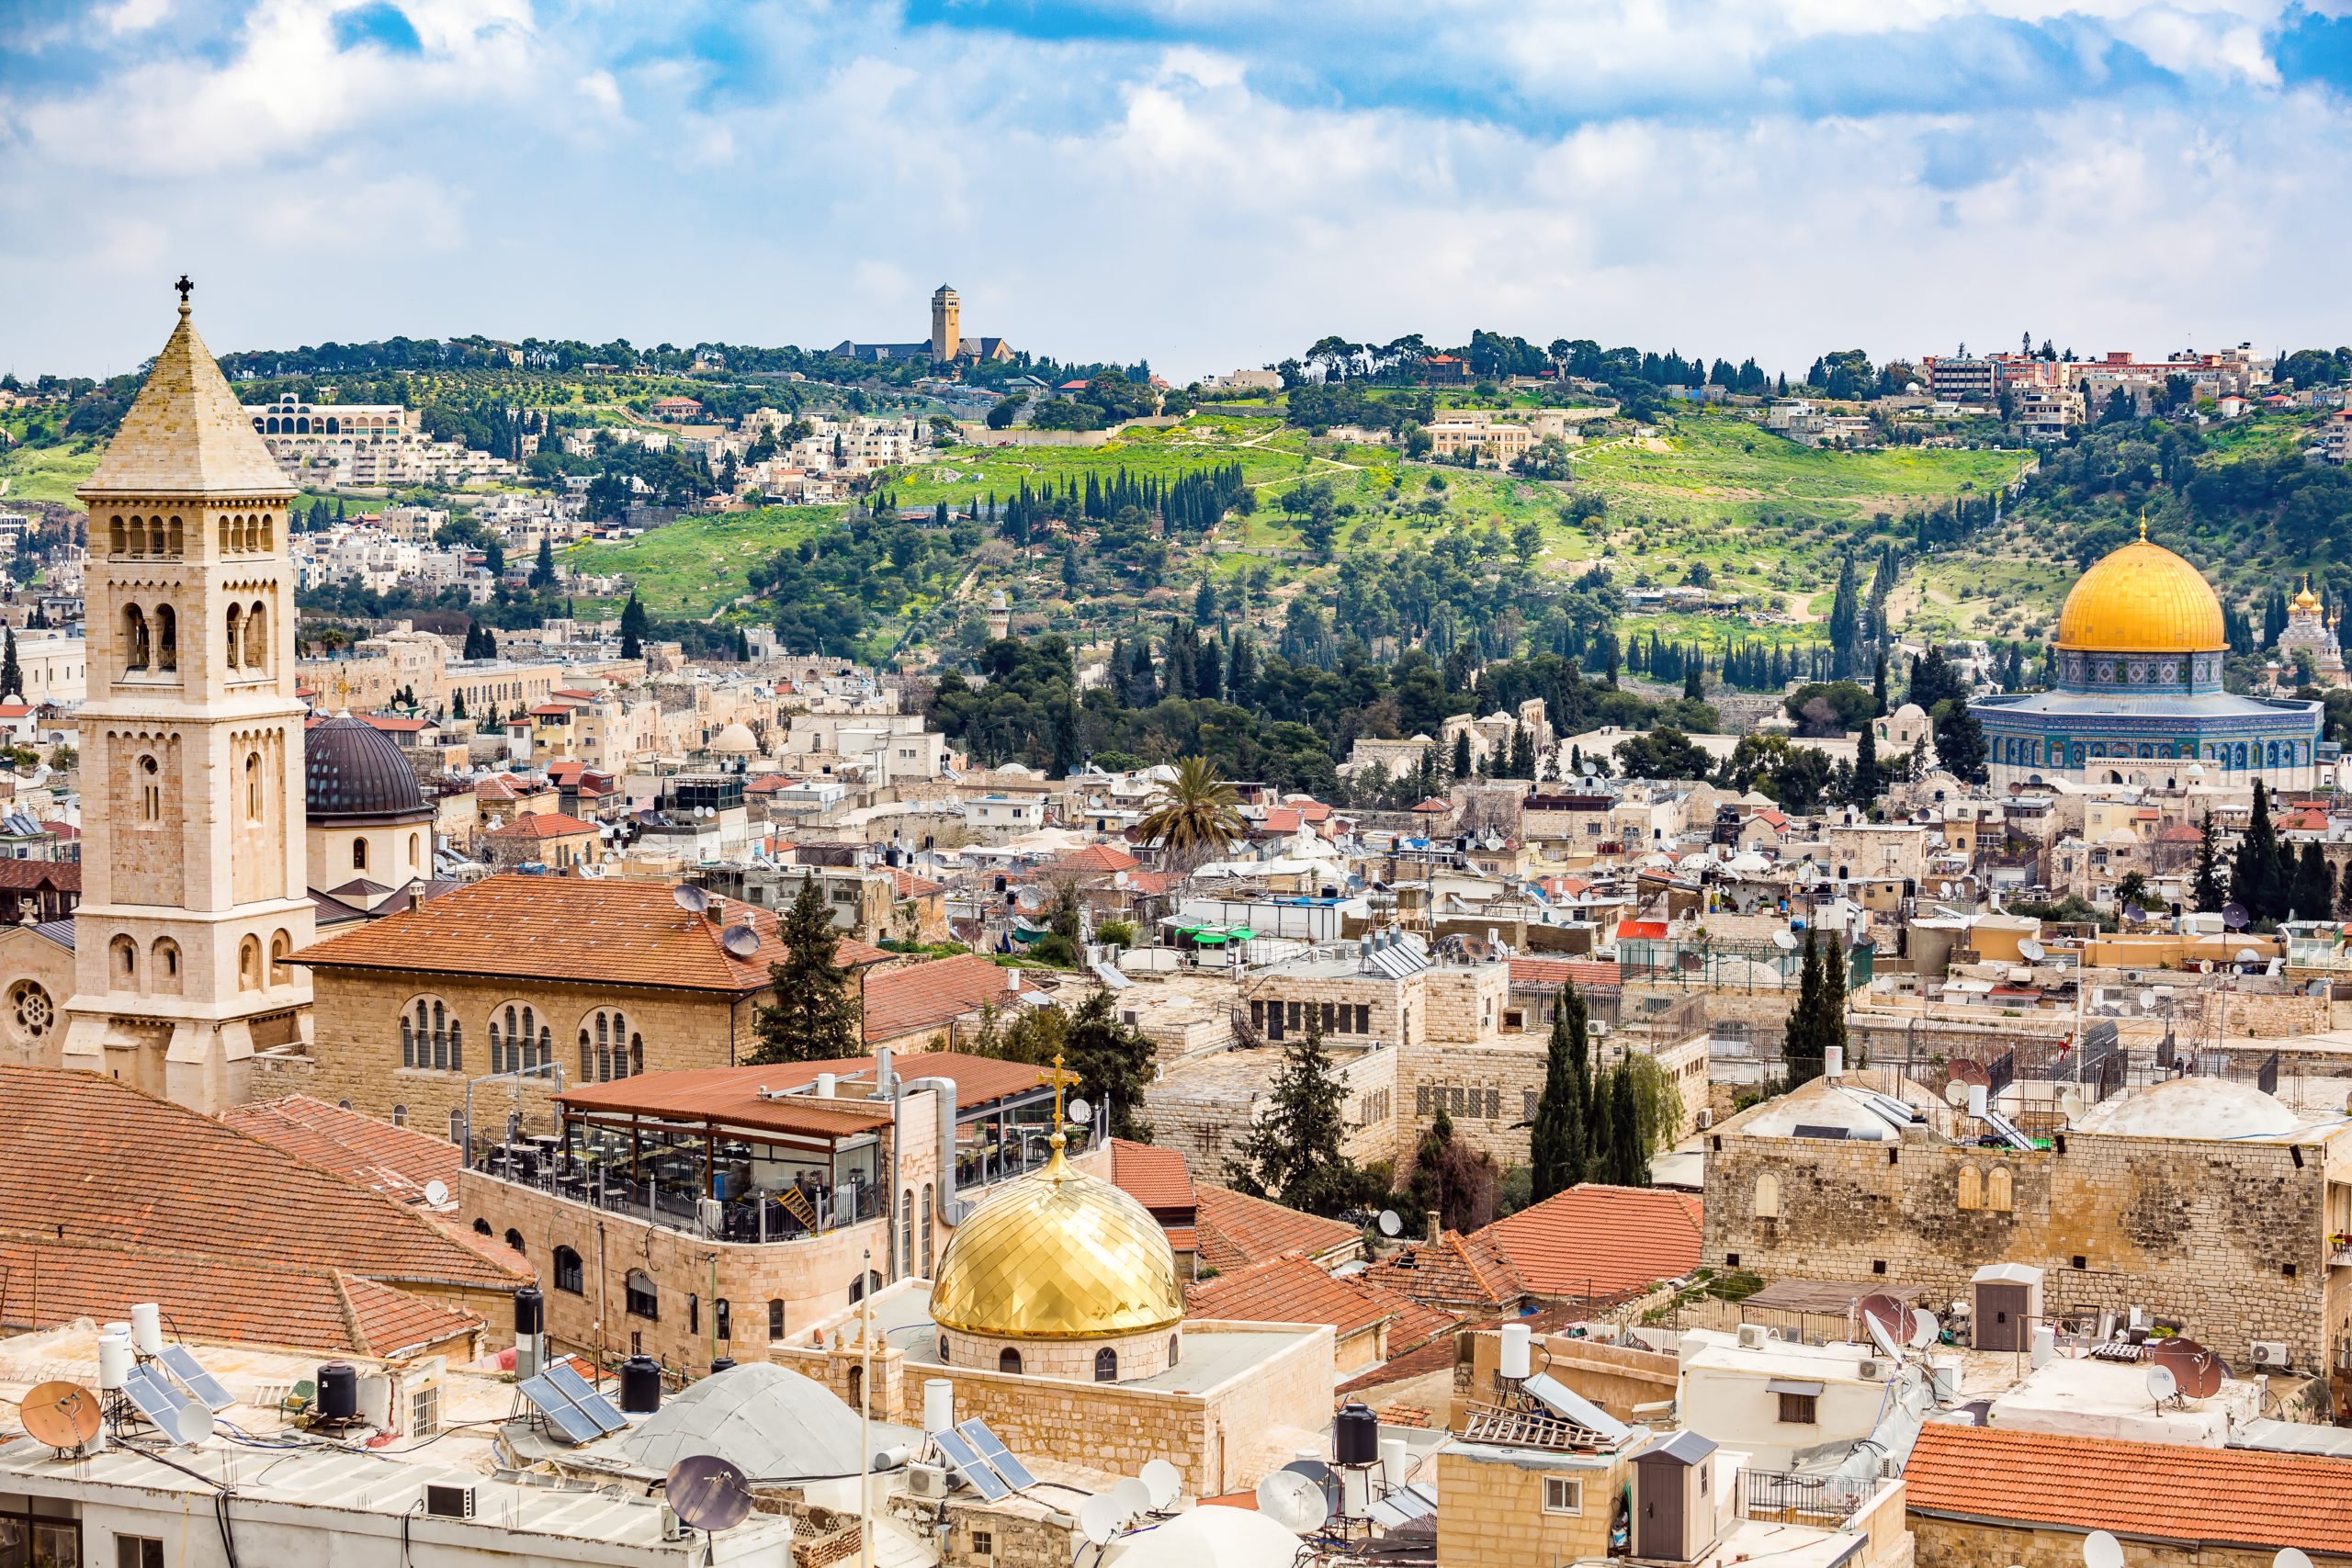 Discover The City Of Jerusalem On The 13 Day Highlights Of Israel, Saudi Arabia & Jordan Package Tour